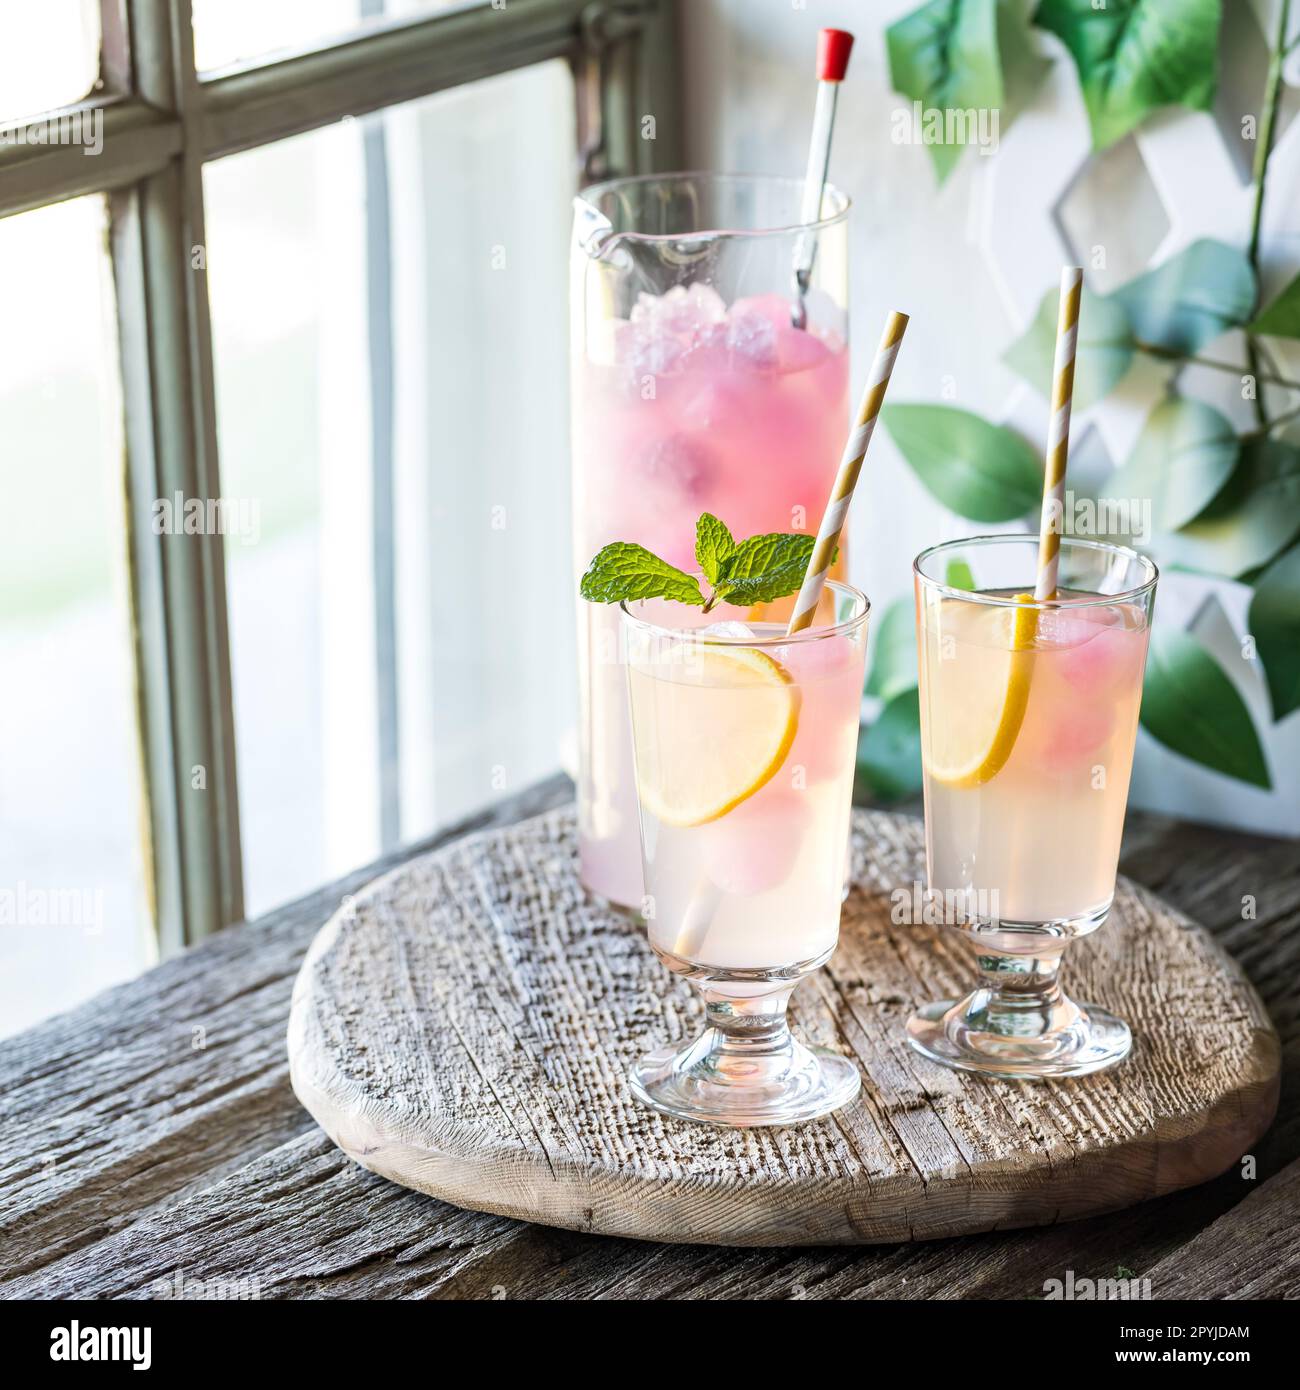 Cold and refreshing glasses of lemonade with pink lemonade ice cubes. Stock Photo